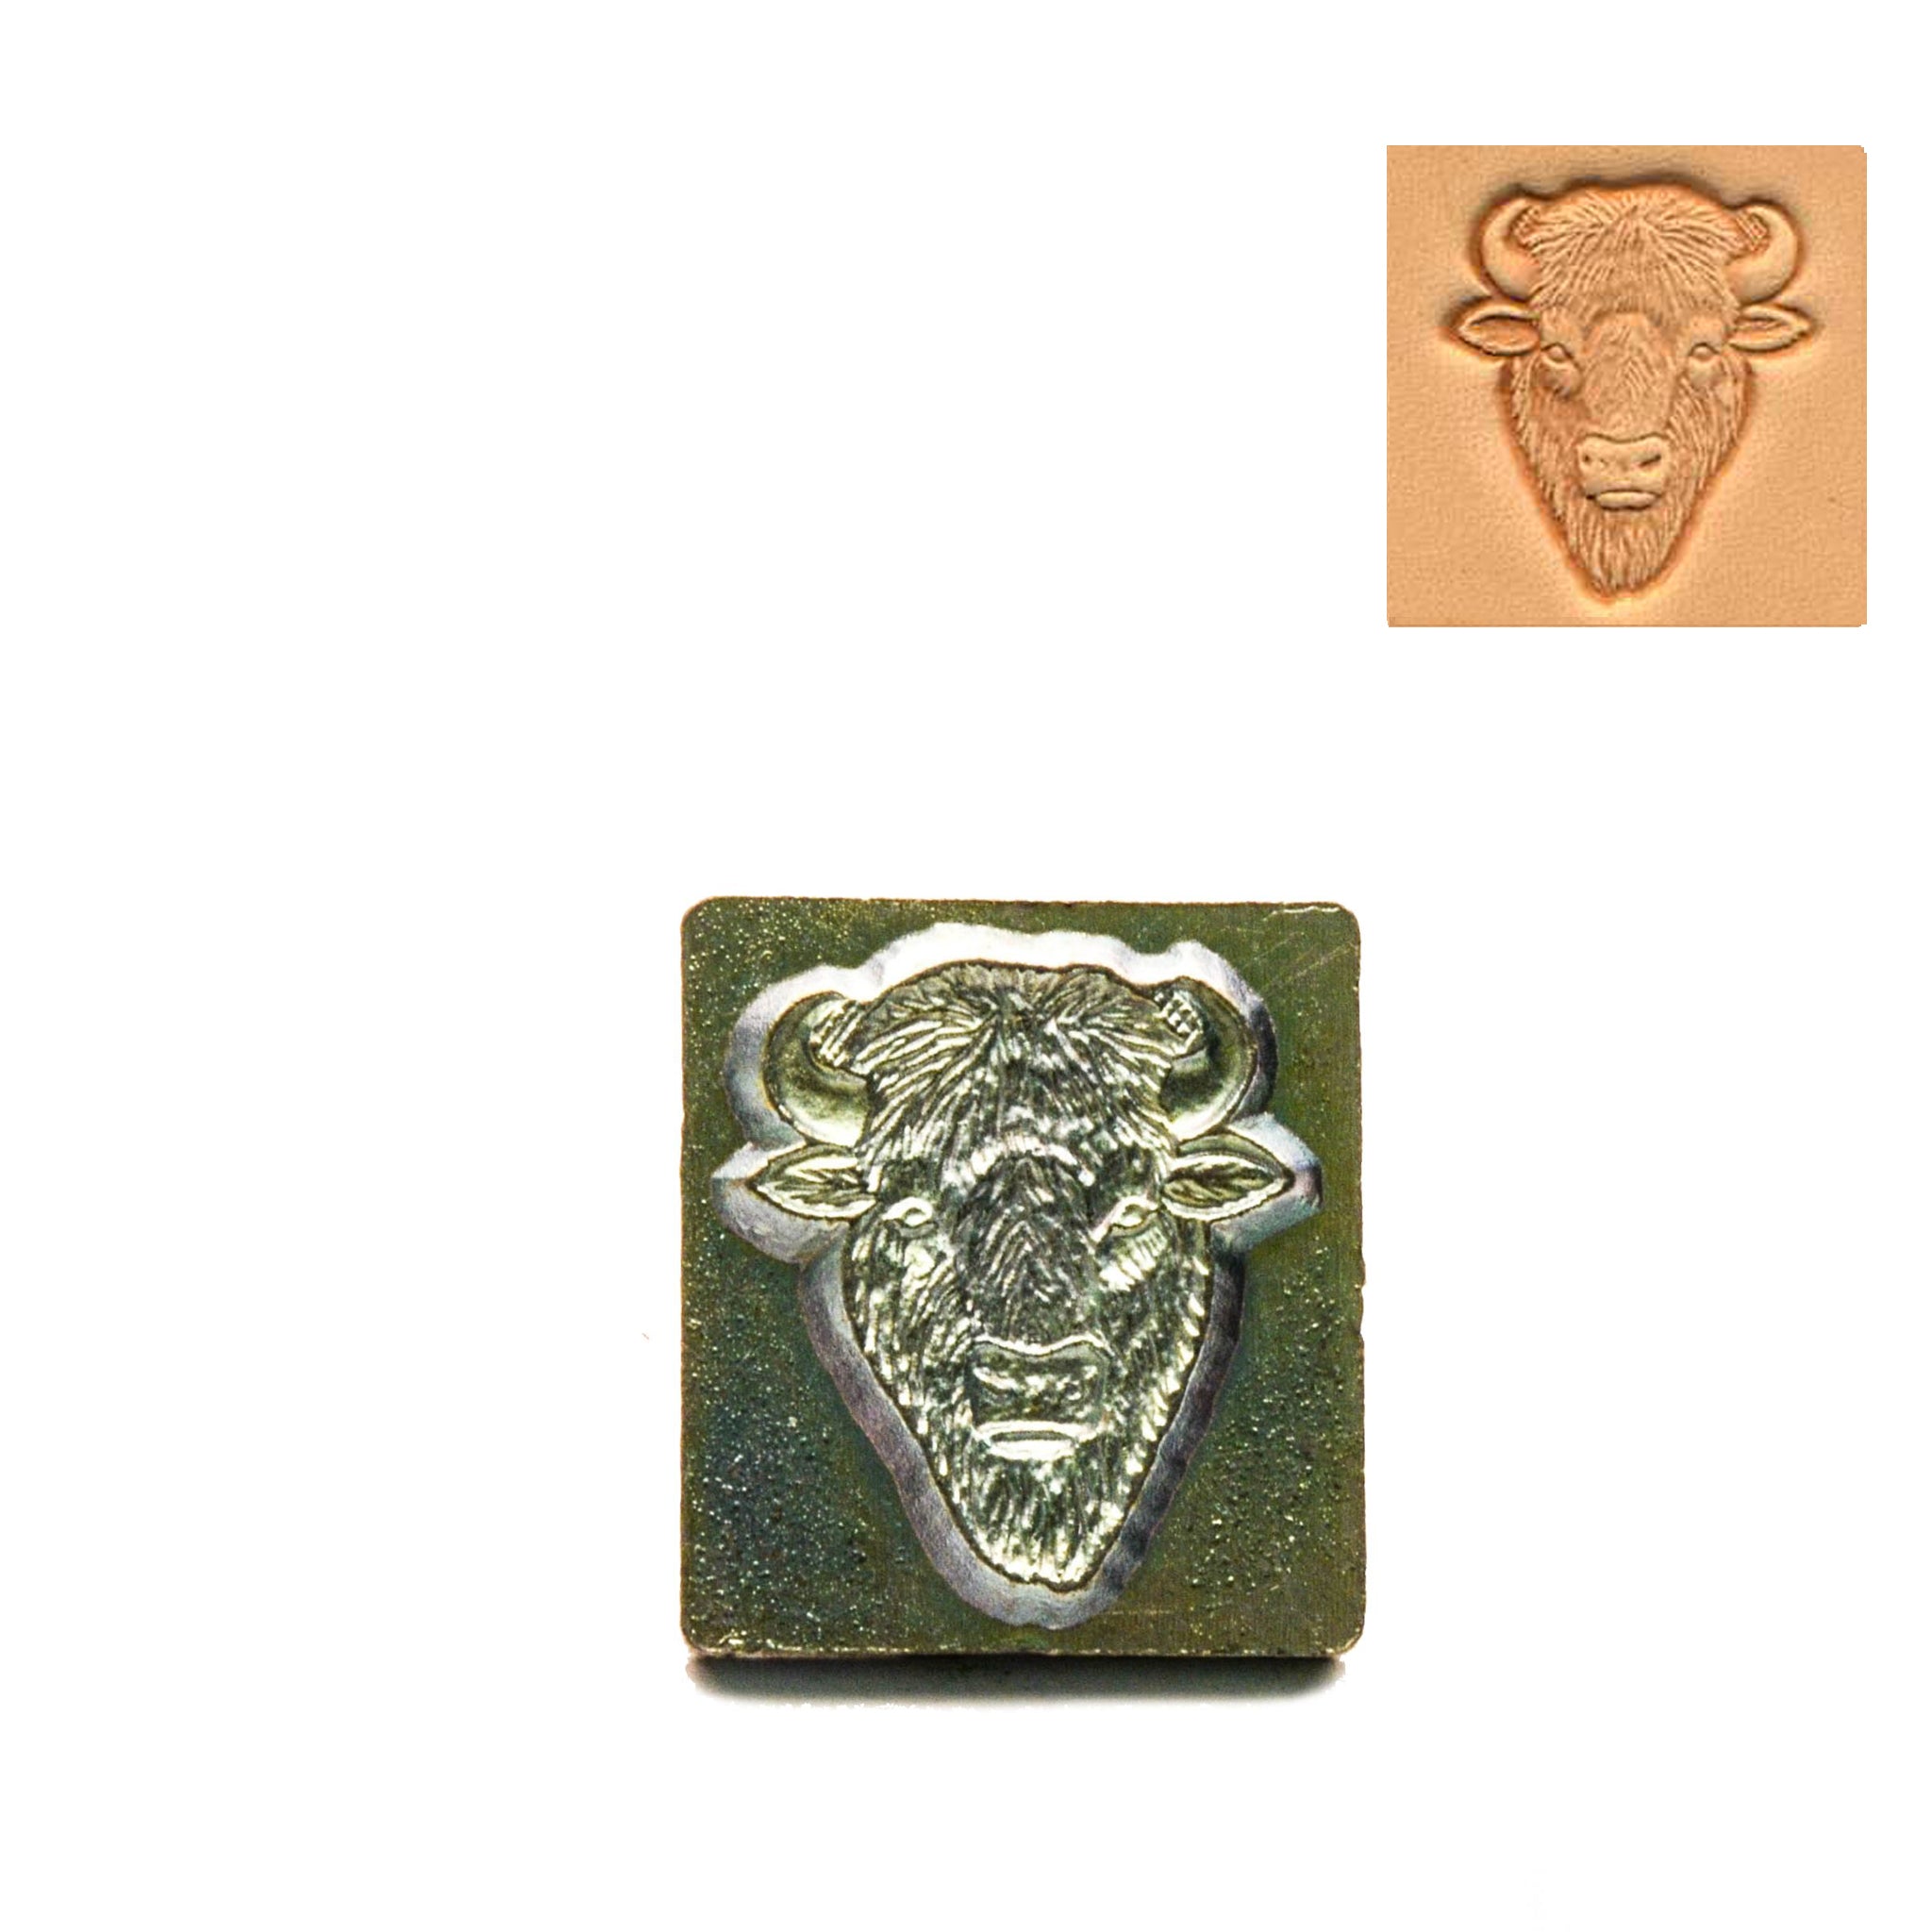 Buffalo/Bison Head 3D Embossing Stamp from Identity Leathercraft